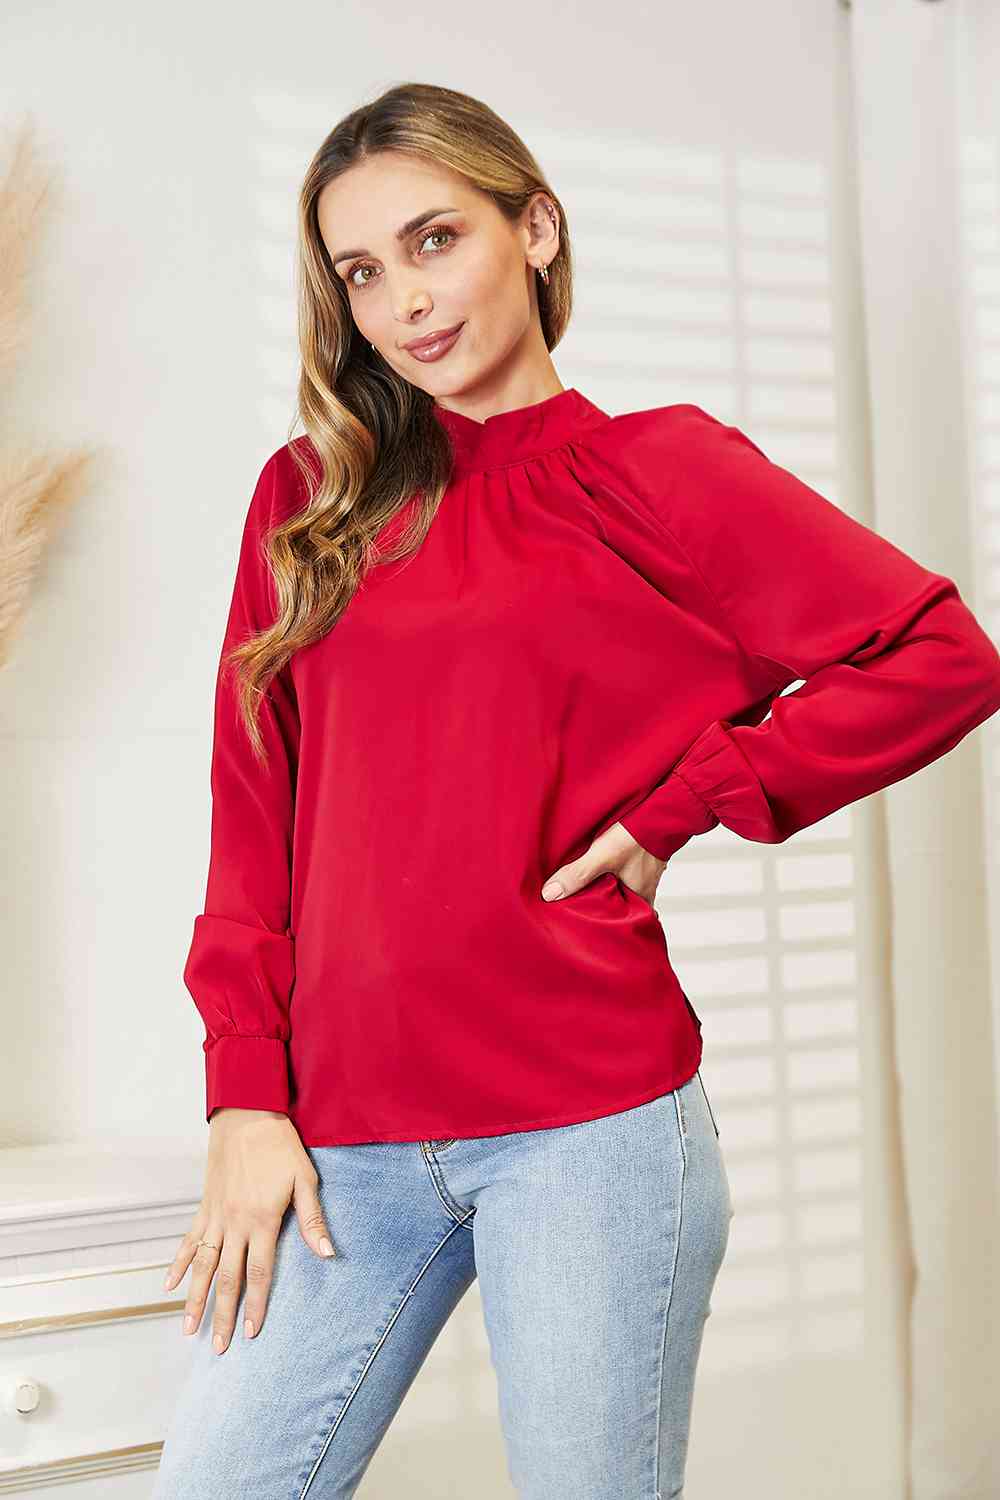 Cutout Gathered Detail Mock Neck Top - Kawaii Stop - Cutout Detail, Double Take, Easy Care, Gathered Detail, Mock Neck Top, Modern Style, Ship from USA, Solid Color, Versatile, Women's Fashion